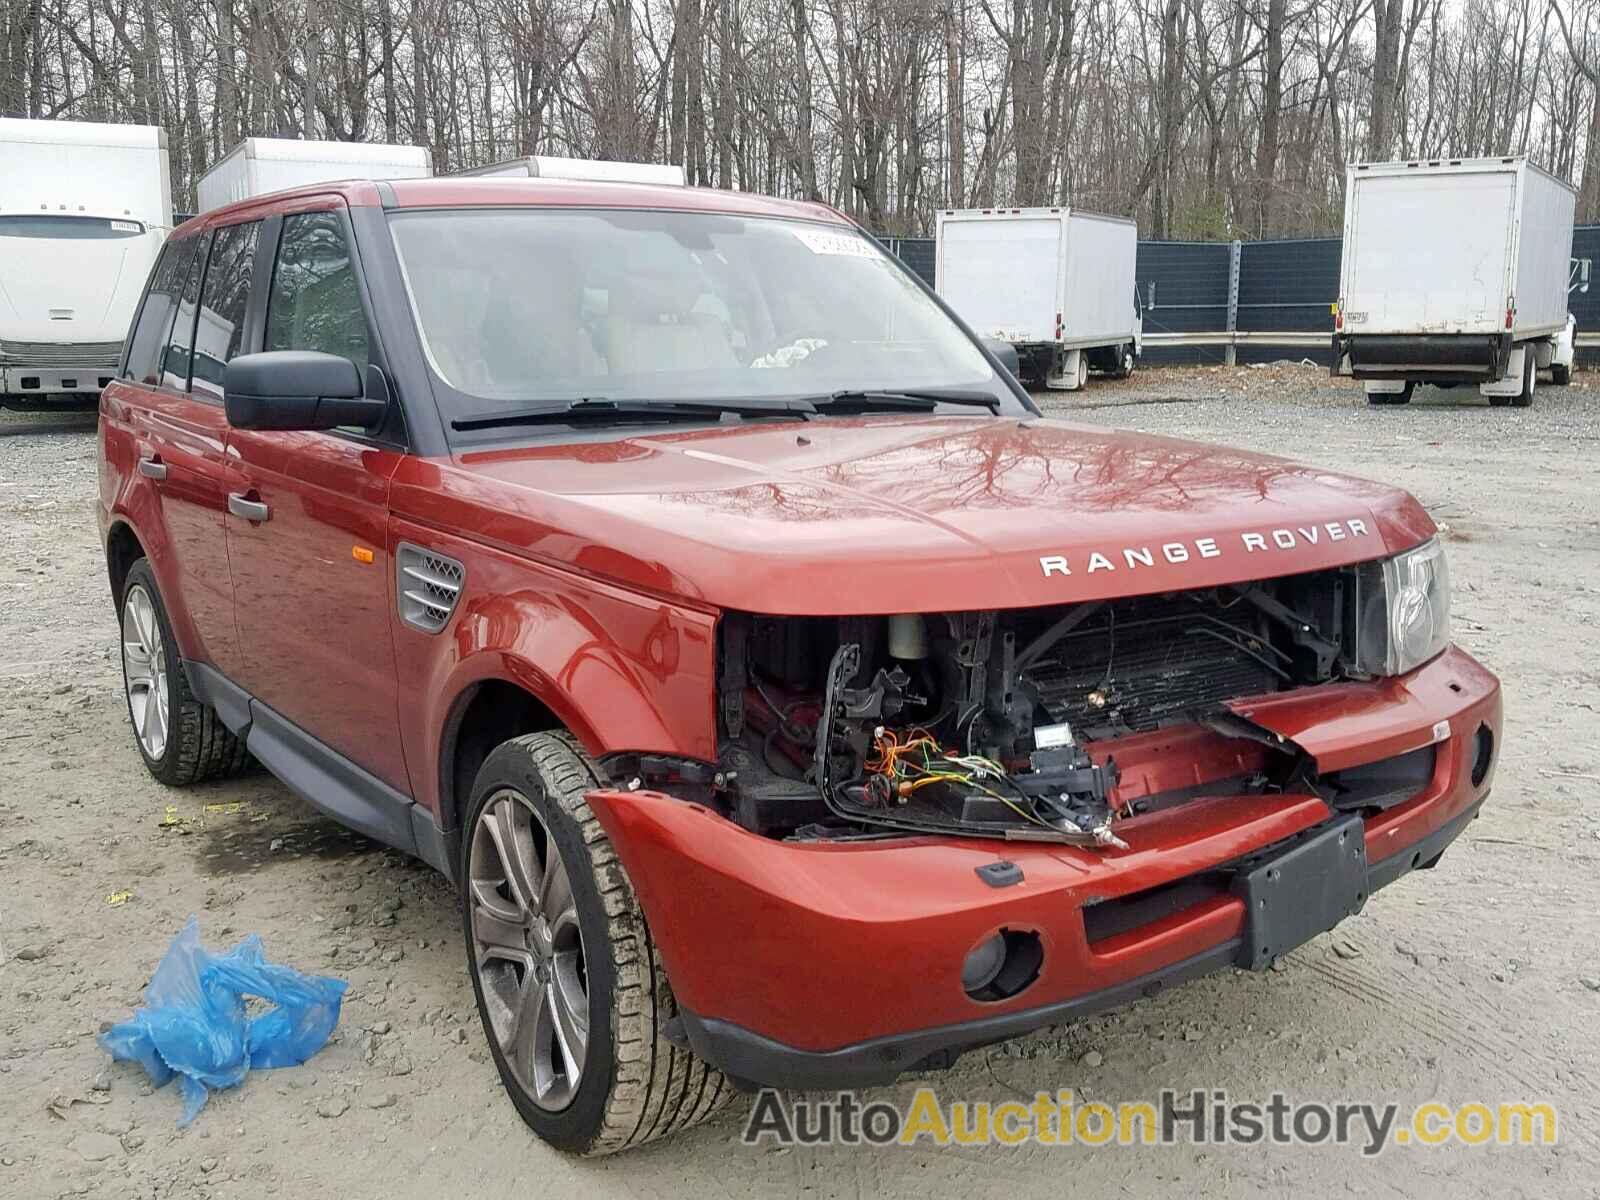 2006 LAND ROVER RANGE ROVER SPORT SUPERCHARGED, SALSH23466A967316